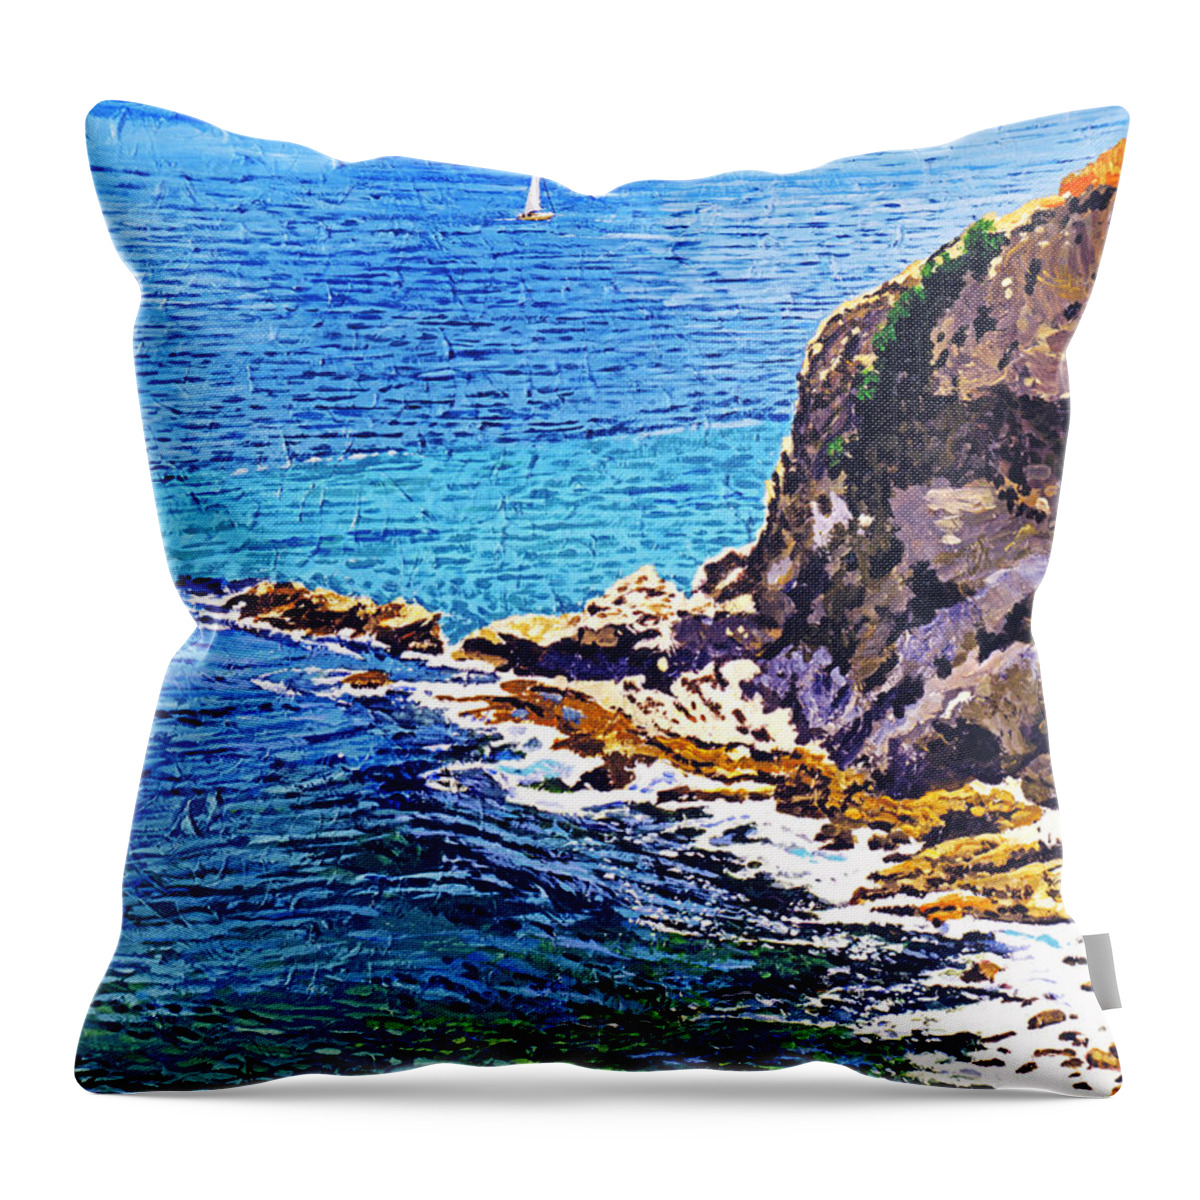 Seascape Throw Pillow featuring the painting California Coastline by David Lloyd Glover